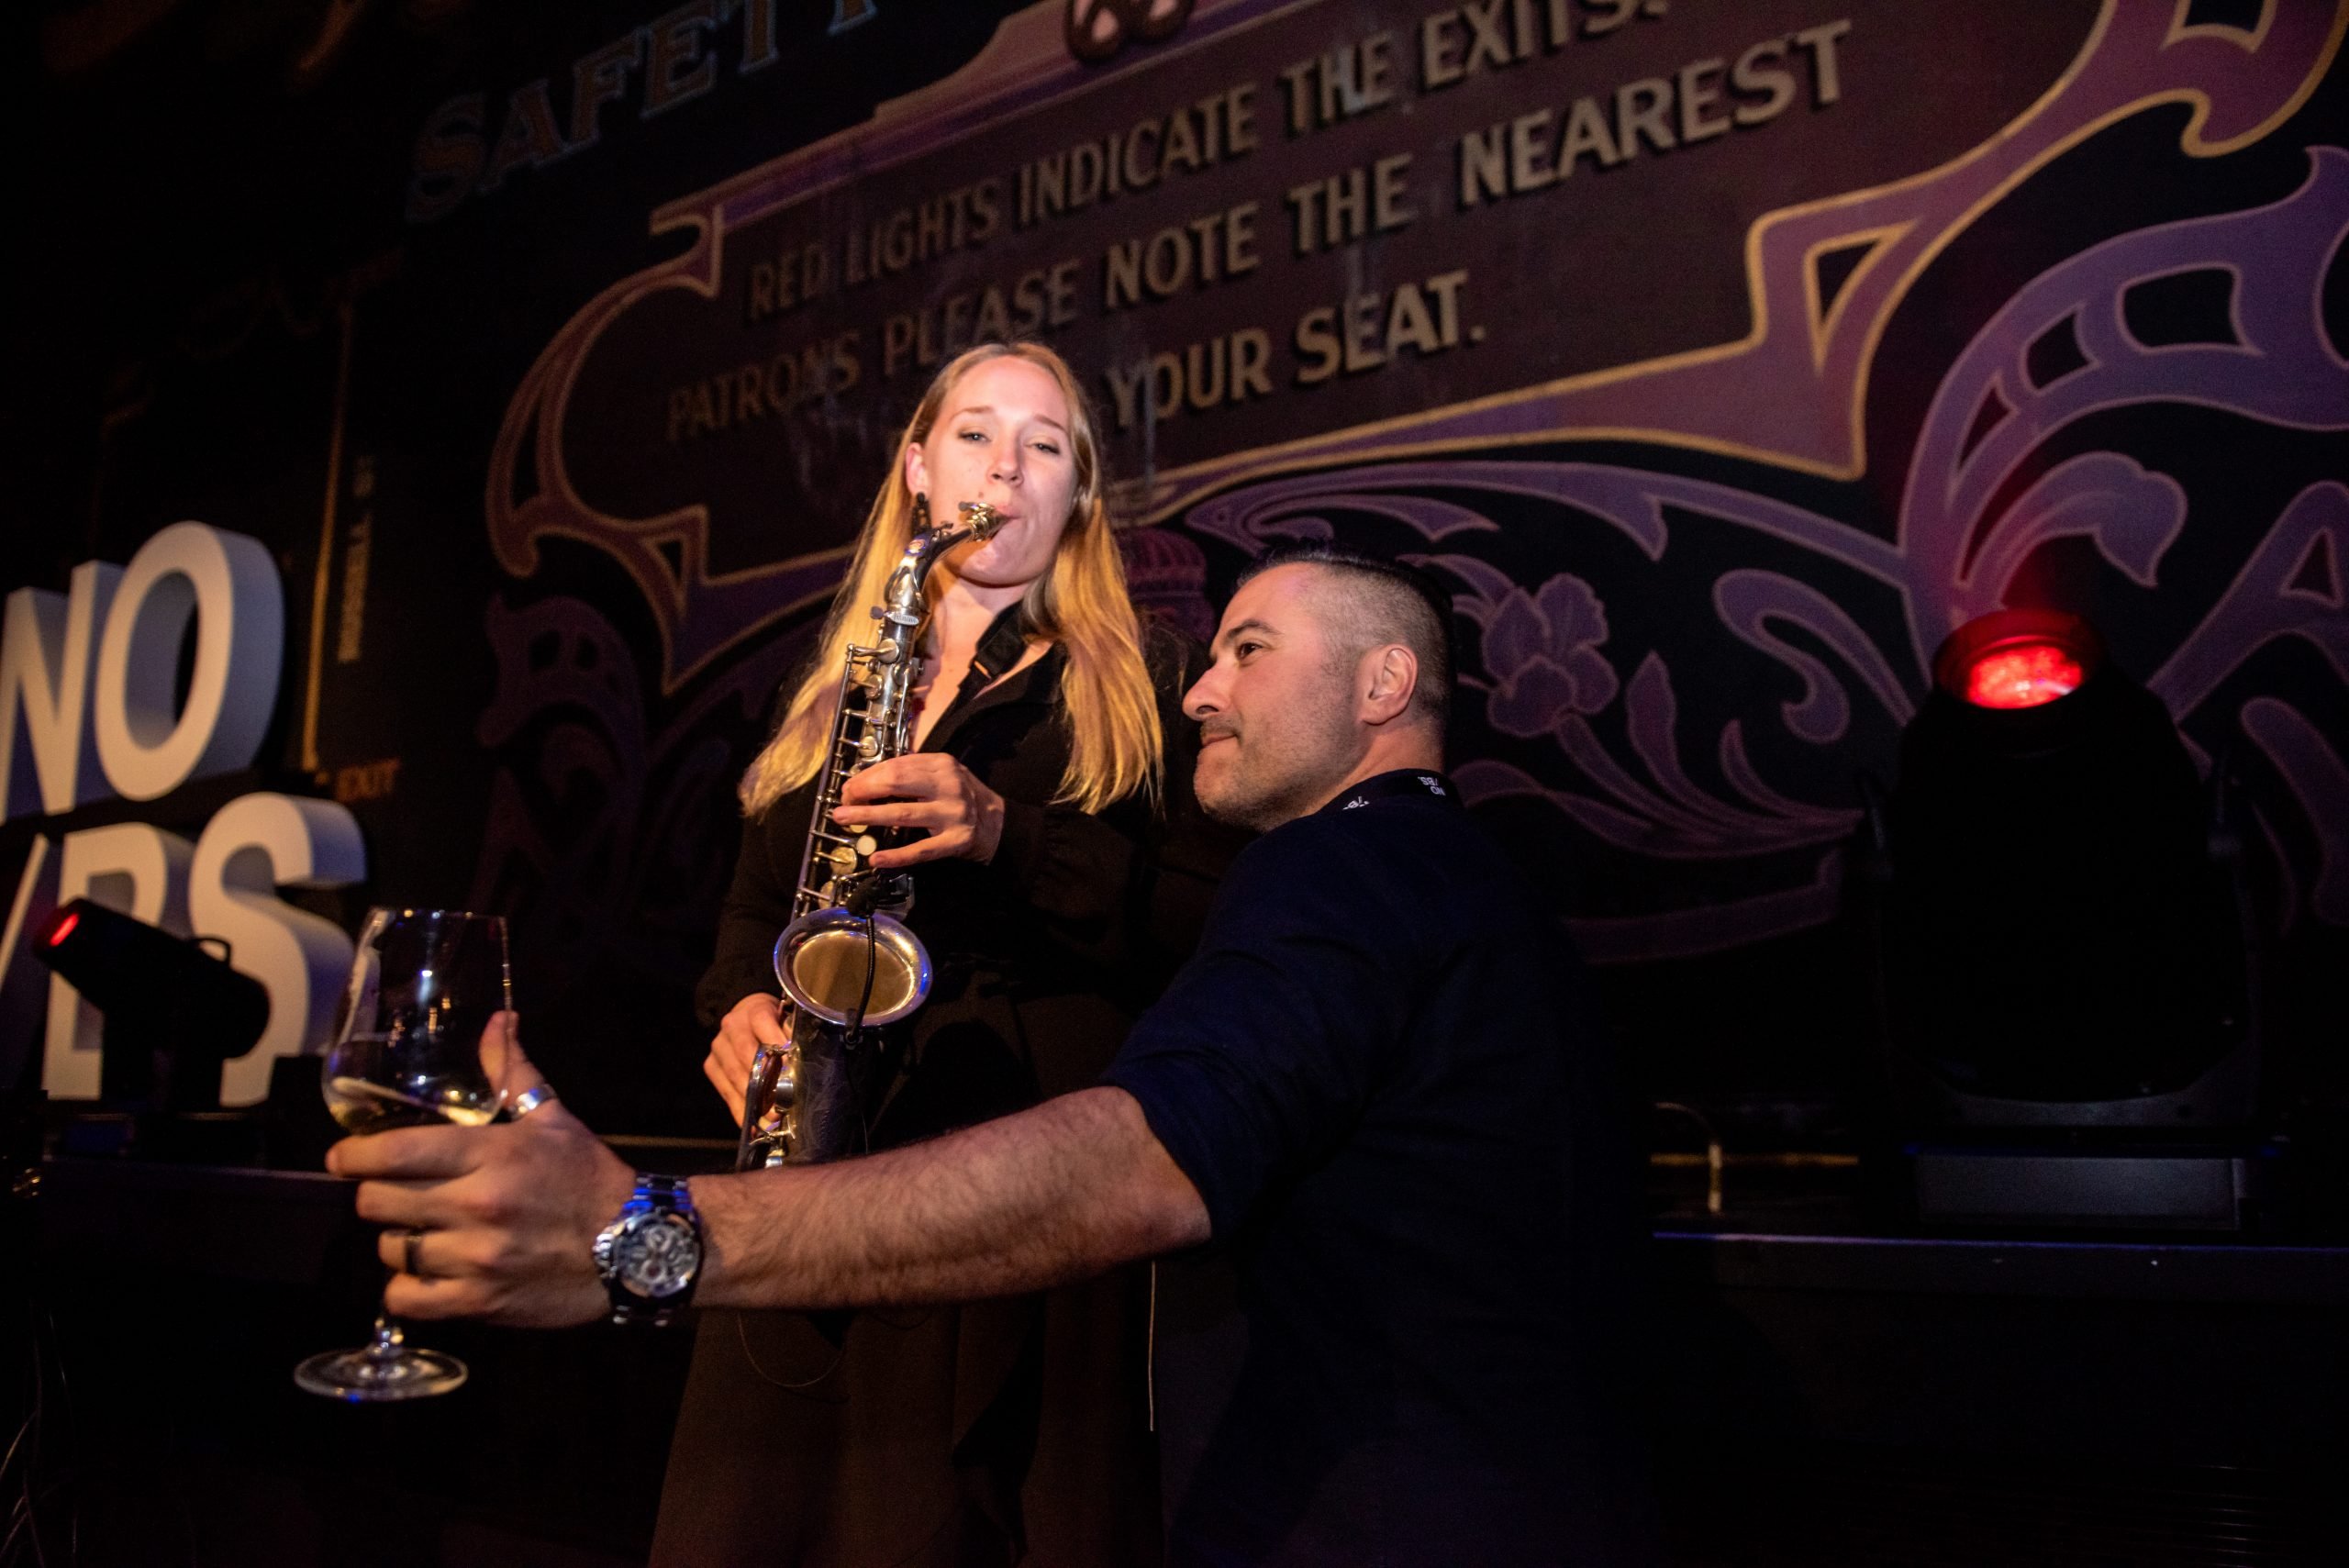 Female Sax Player With Guest With Wine In His Hand At Melbourne Conference Event